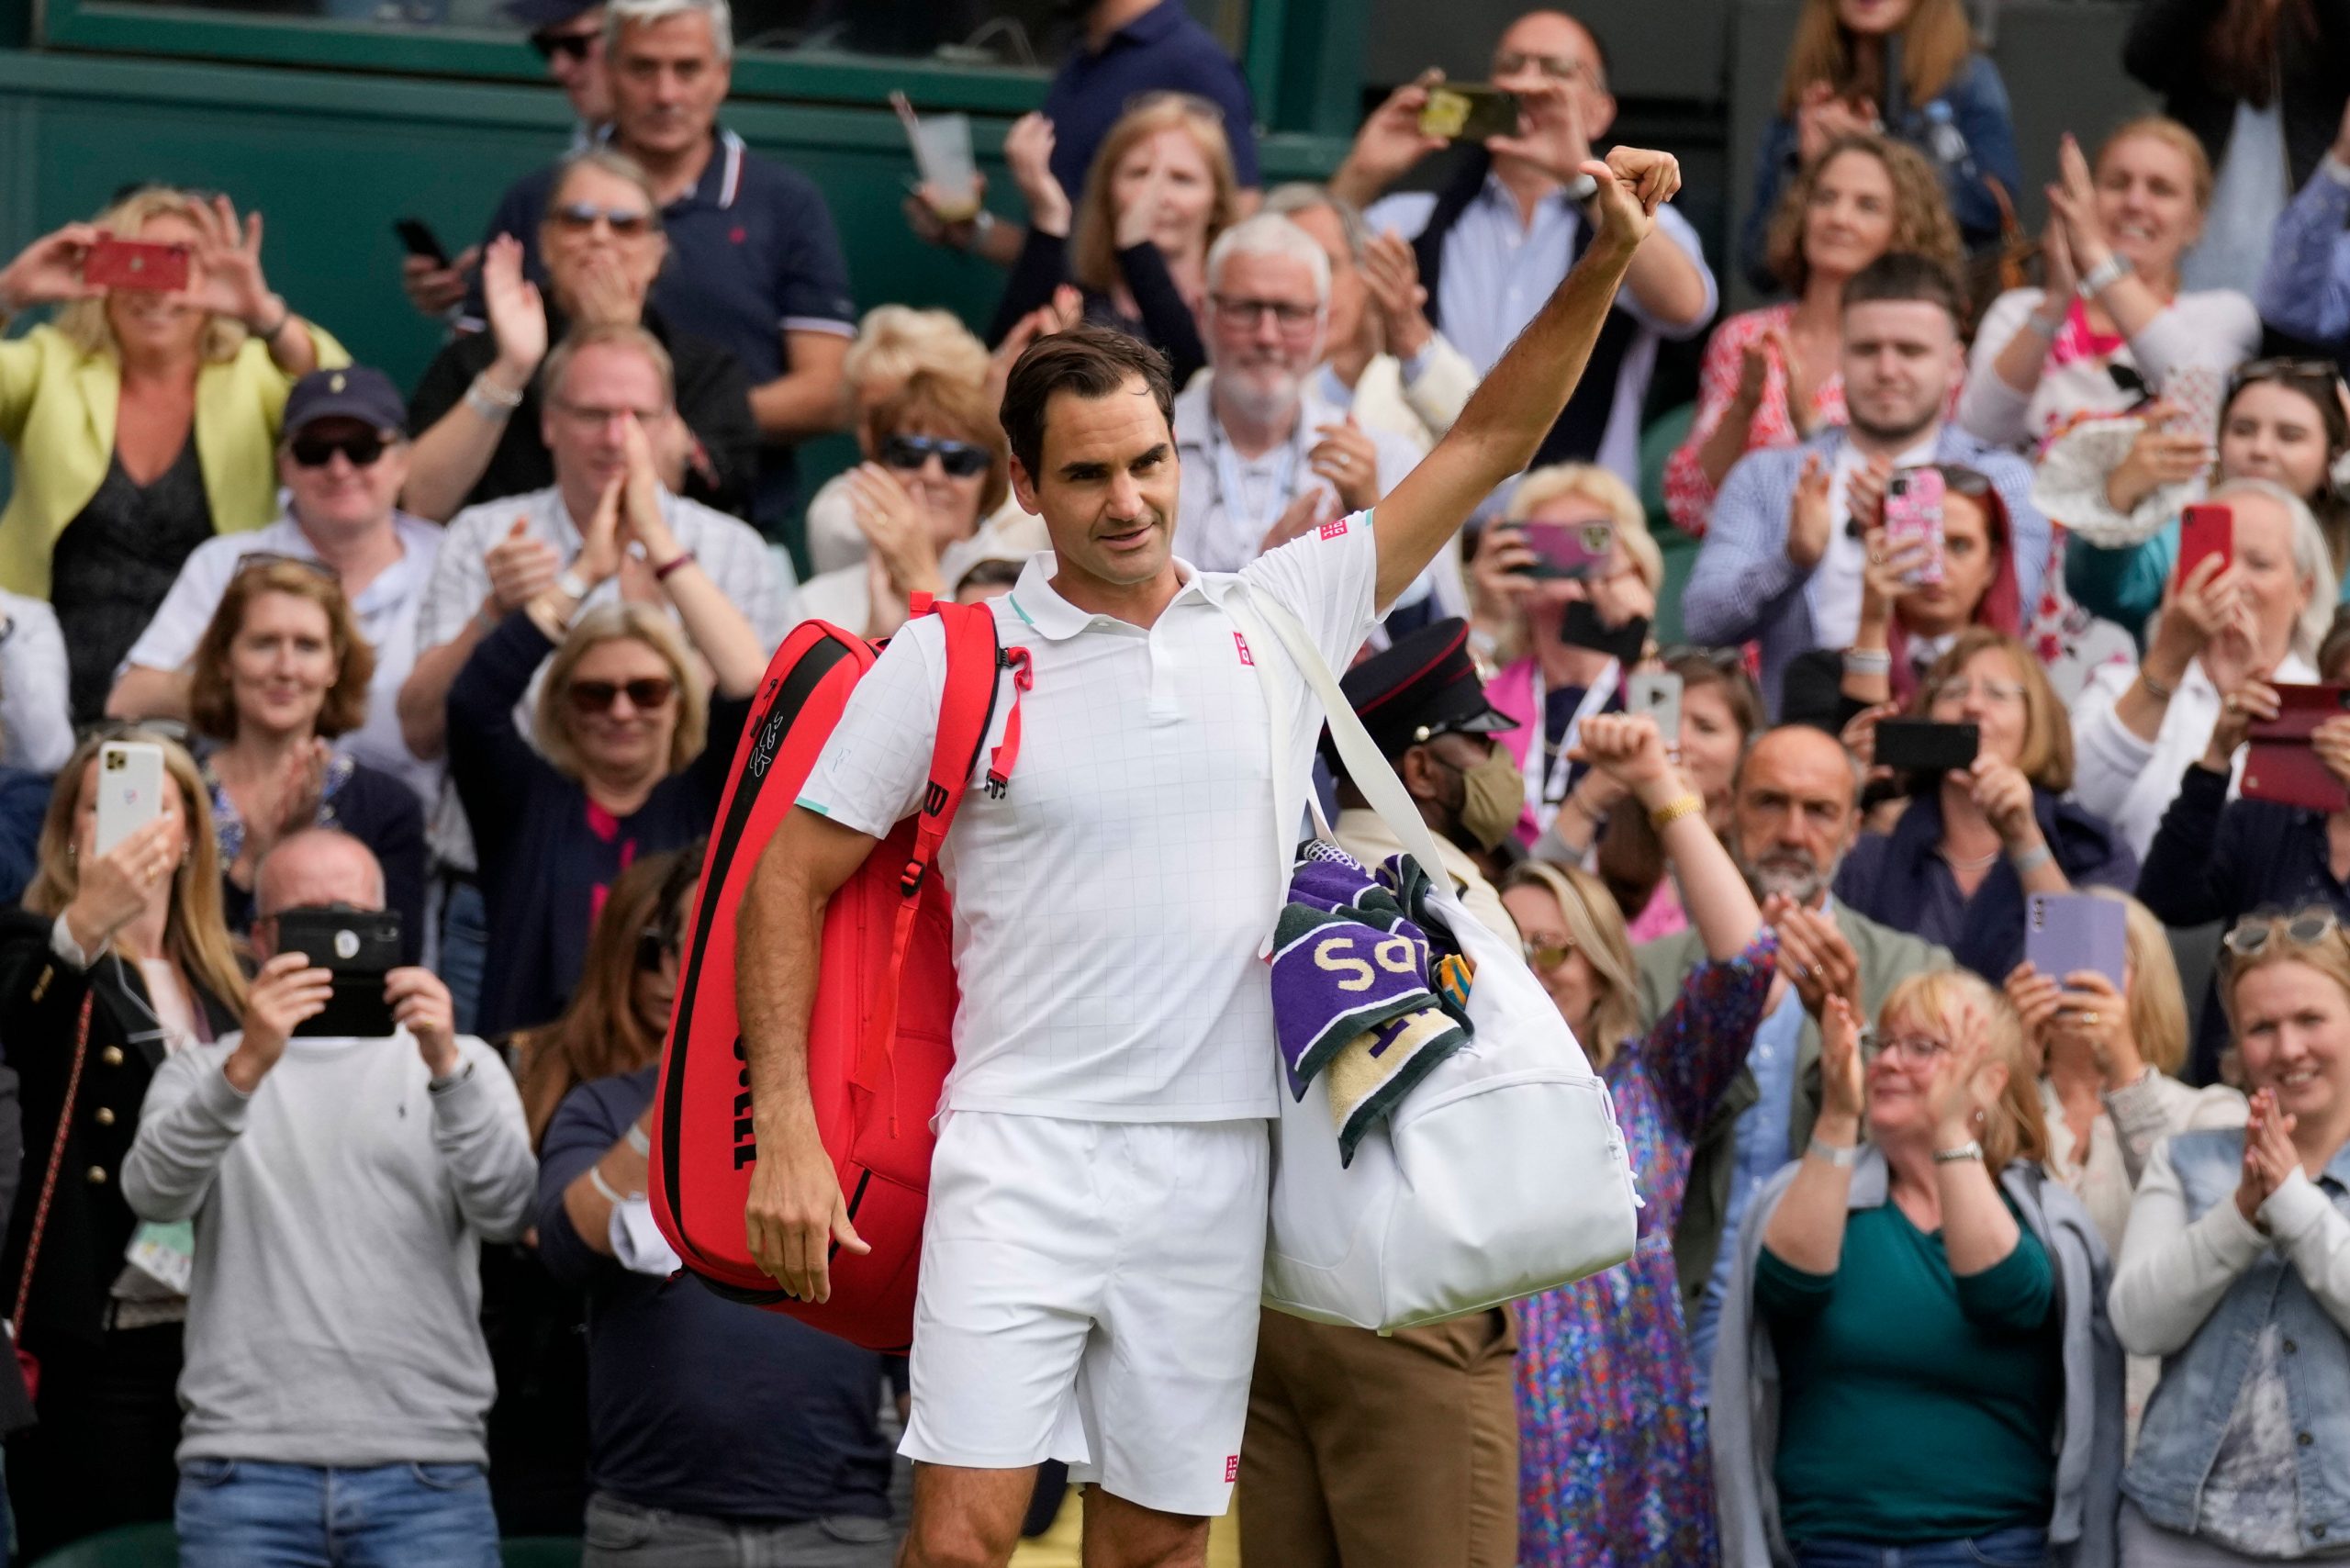 You changed the game: How social media reacted to Federer’s retirement post